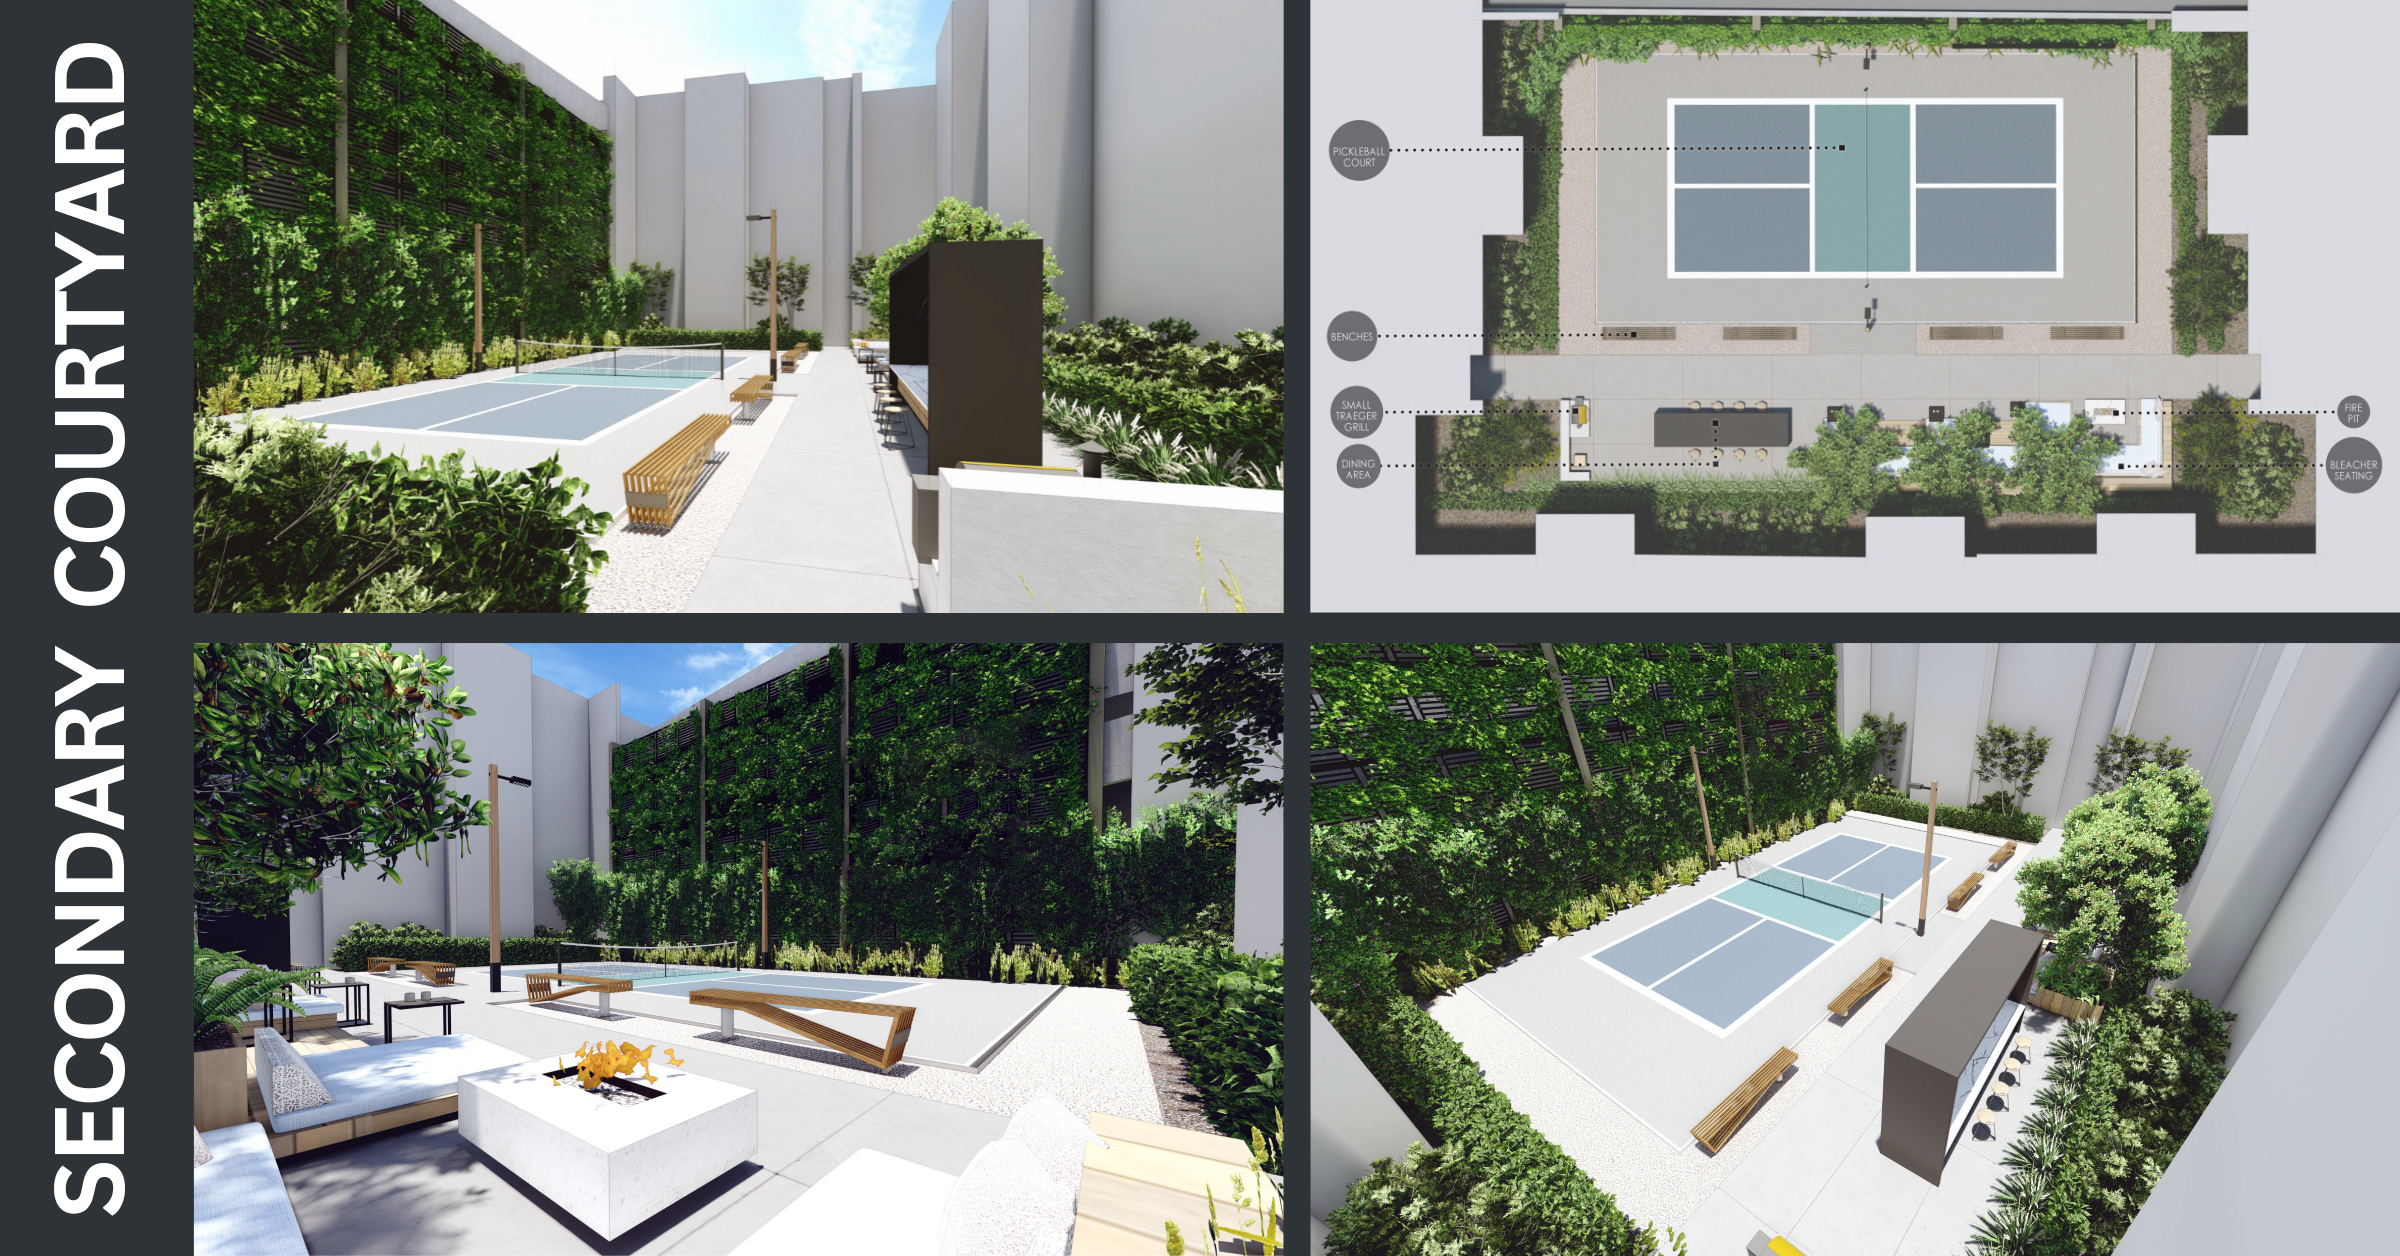 Rendering Images of Secondary Courtyard - Pickle ball Court at Apartment